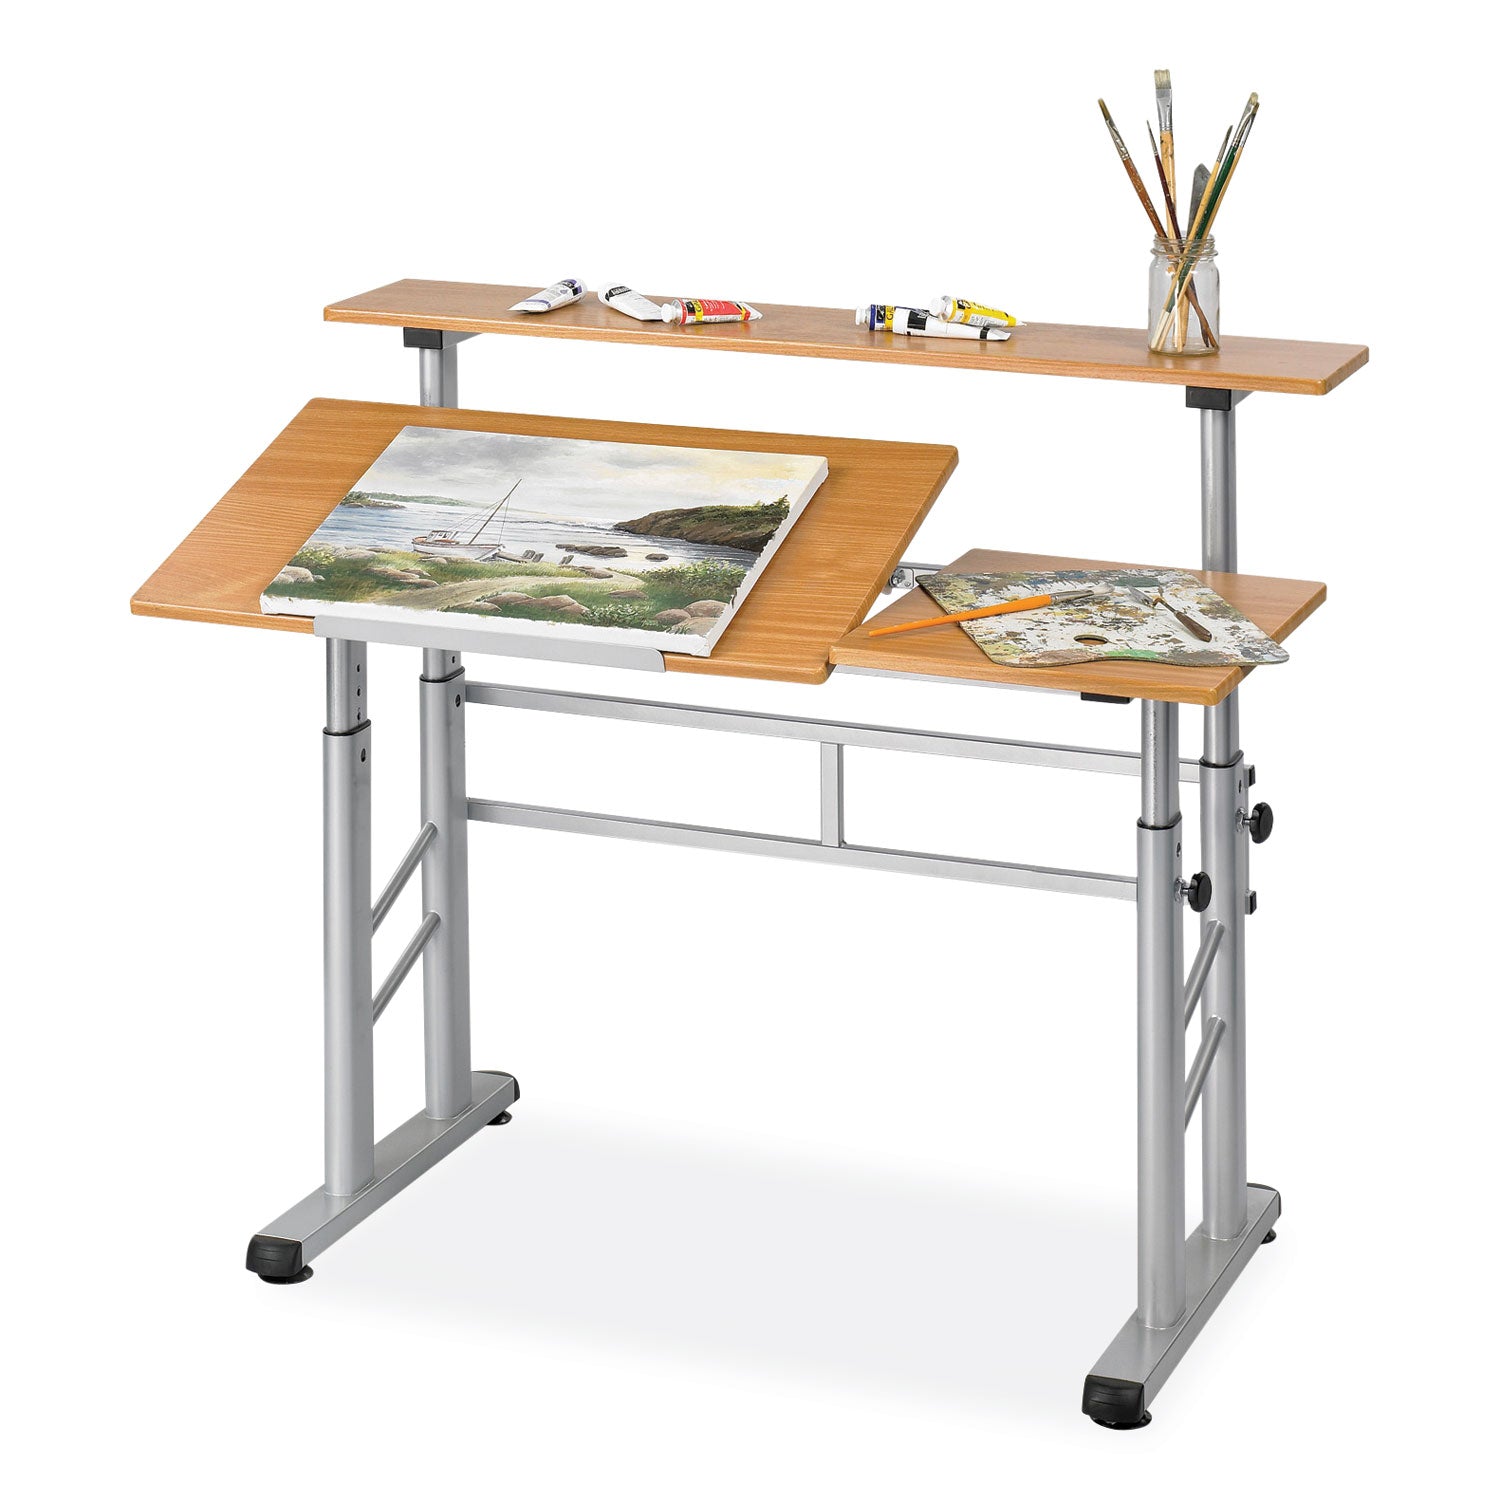 height-adjust-split-level-drafting-table-rectangular-square-4725x2975x26-to-3725-medium-oak-ships-in-1-3-business-days_saf3965mo - 3